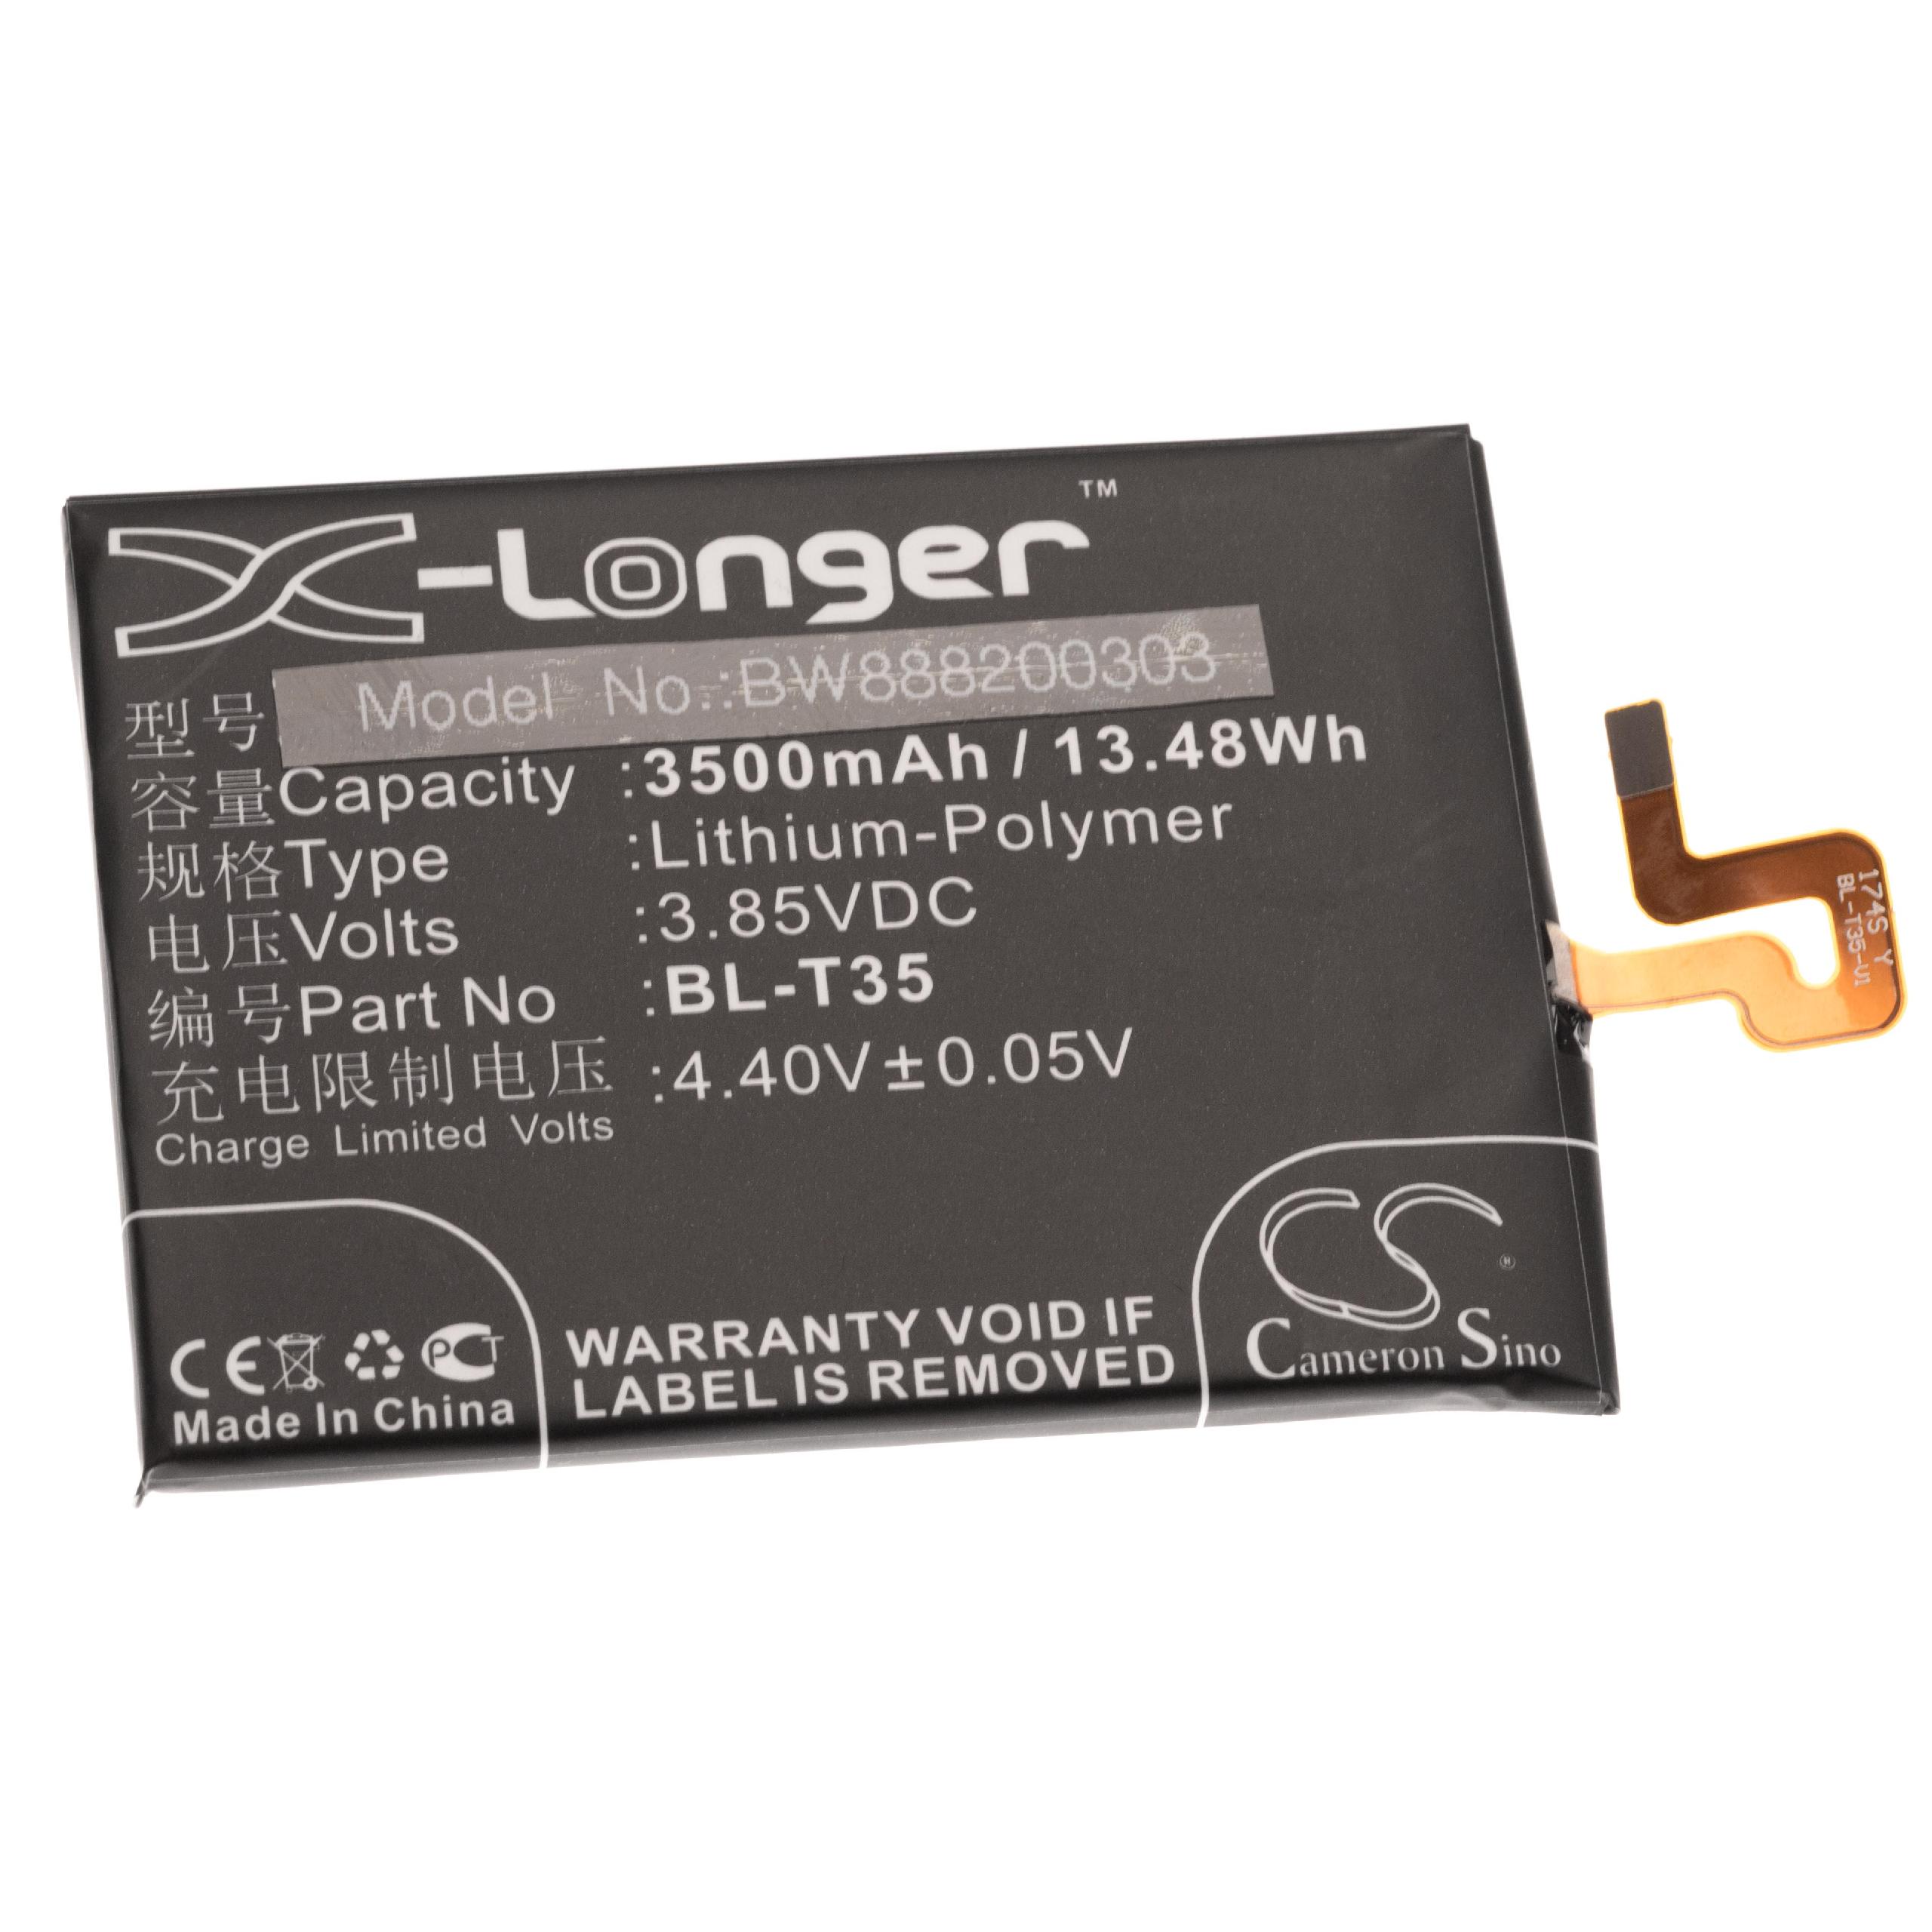 Mobile Phone Battery Replacement for Google EAC63718201, BL-T35 - 3500mAh 3.85V Li-polymer